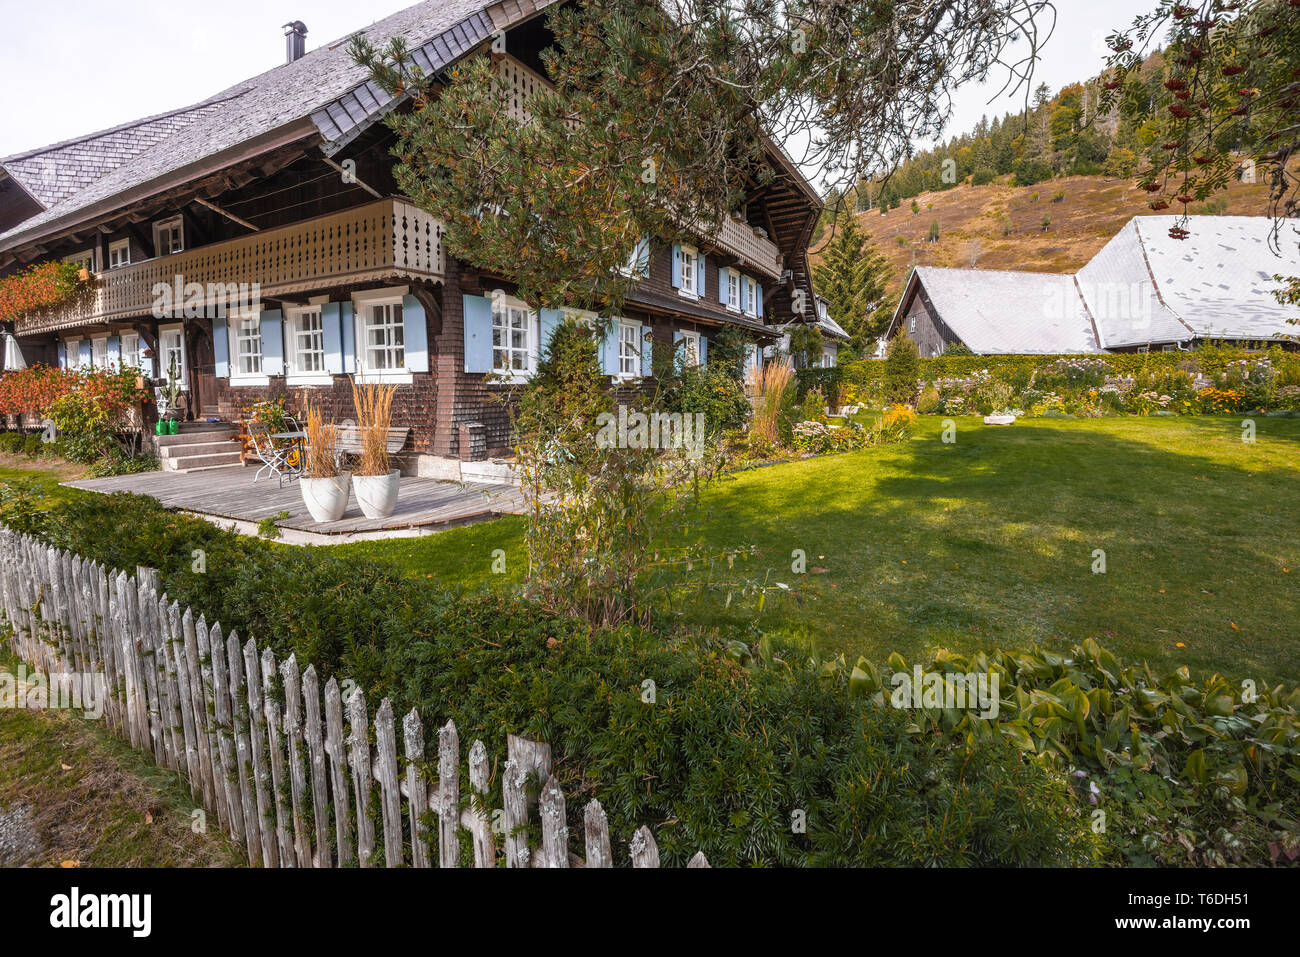 Black Forest house with hipped roof and wooden facade, village Menzenschwand, Germany, farming house with surrounding garden Stock Photo